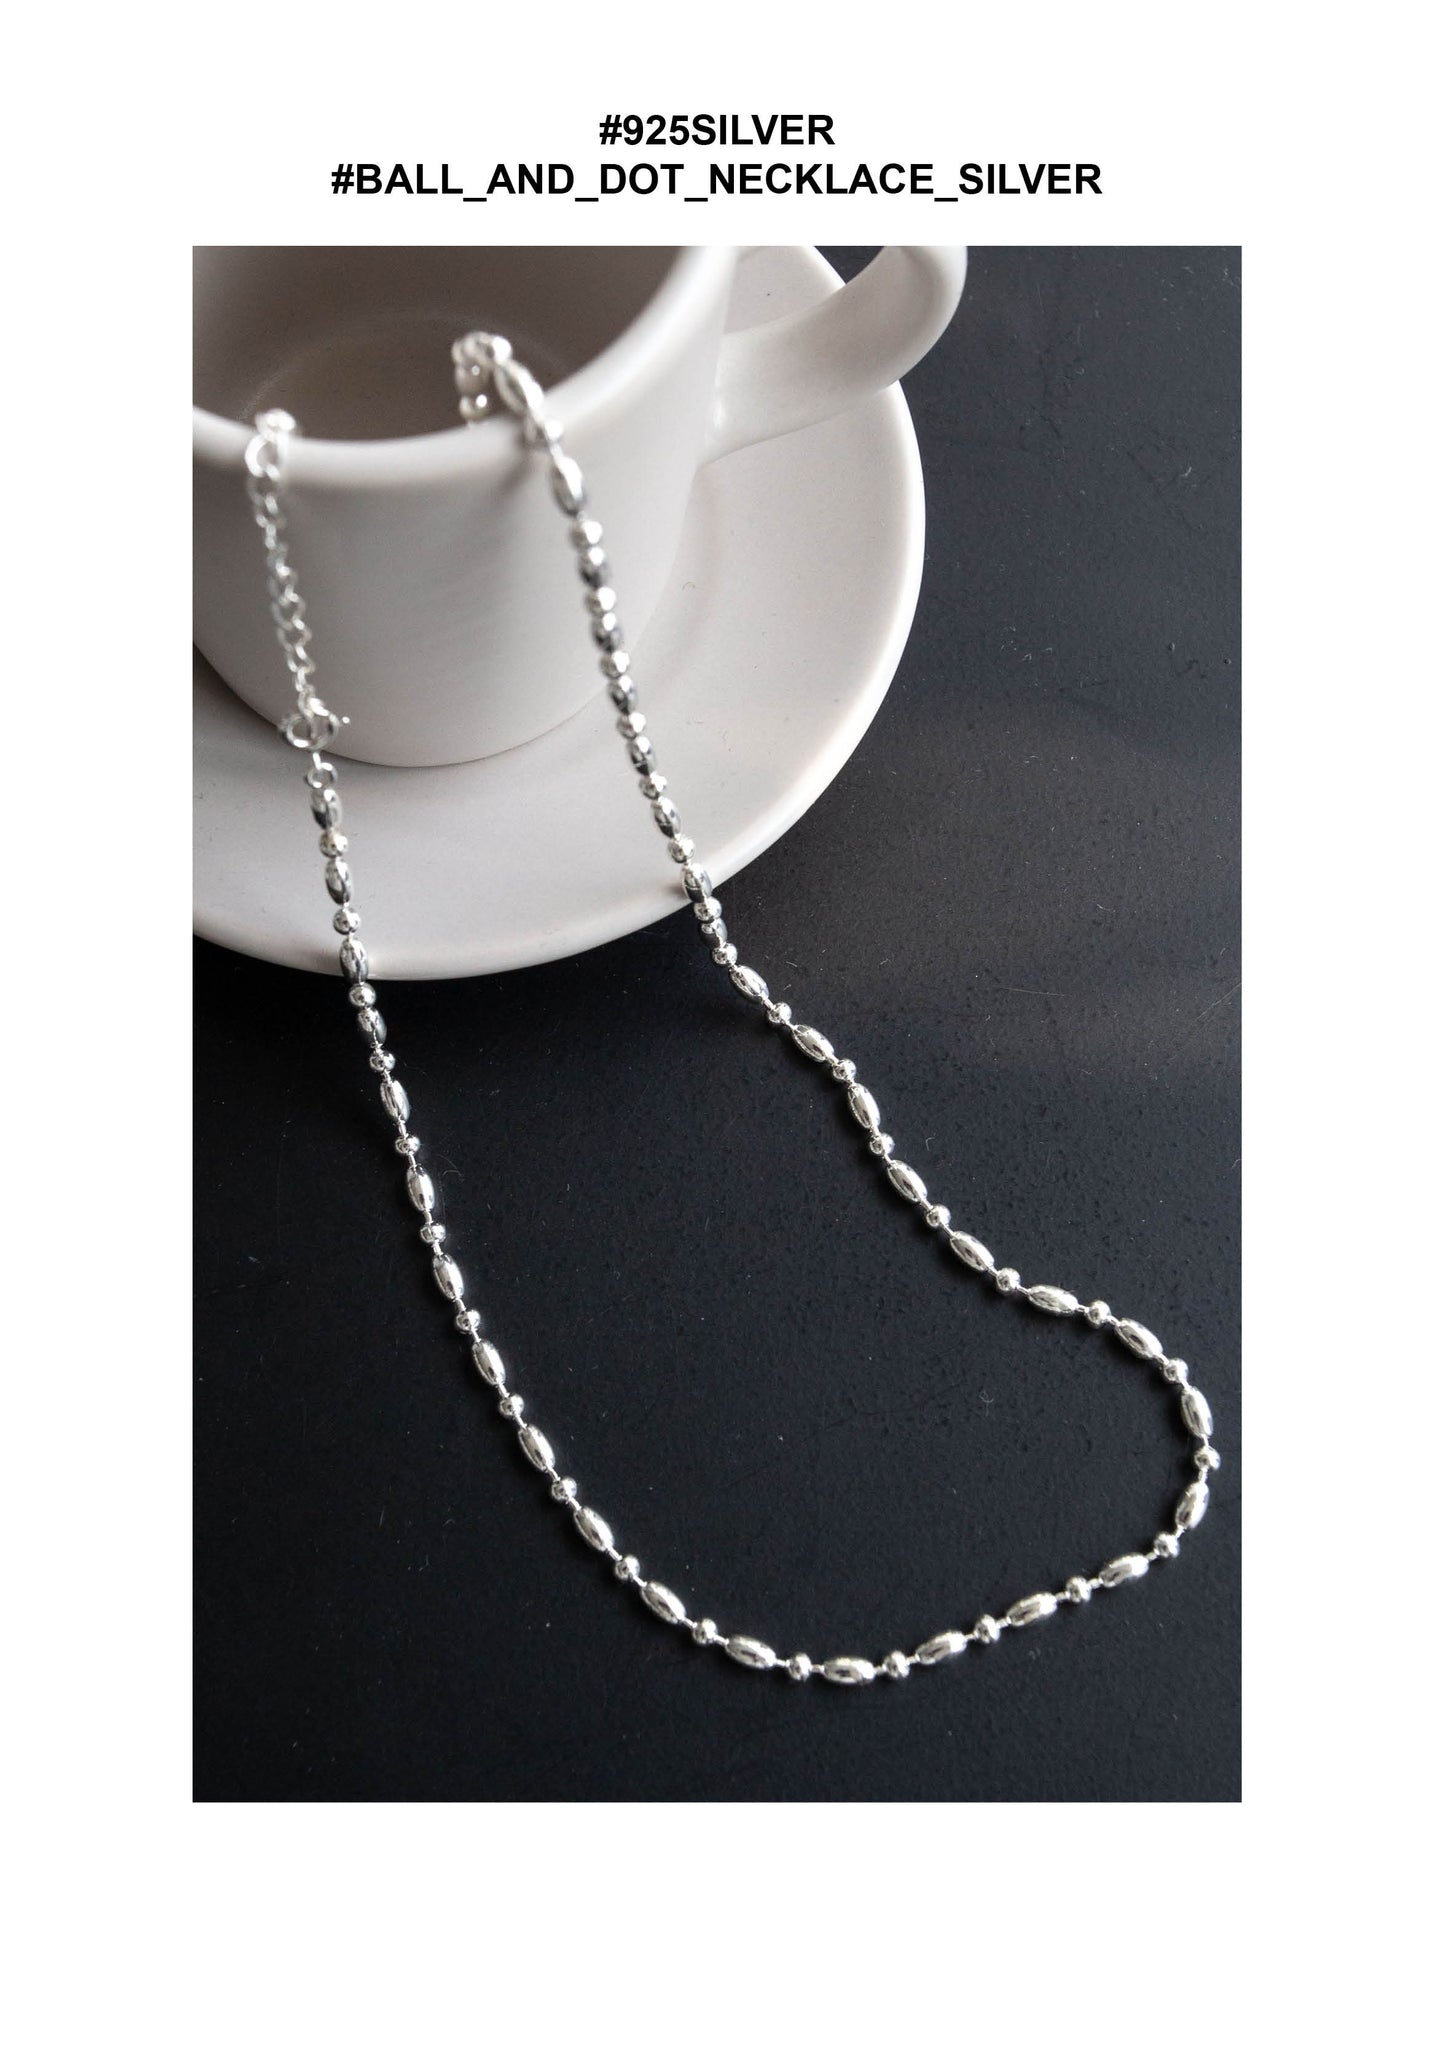 925 Silver Ball and Dot Necklace Silver